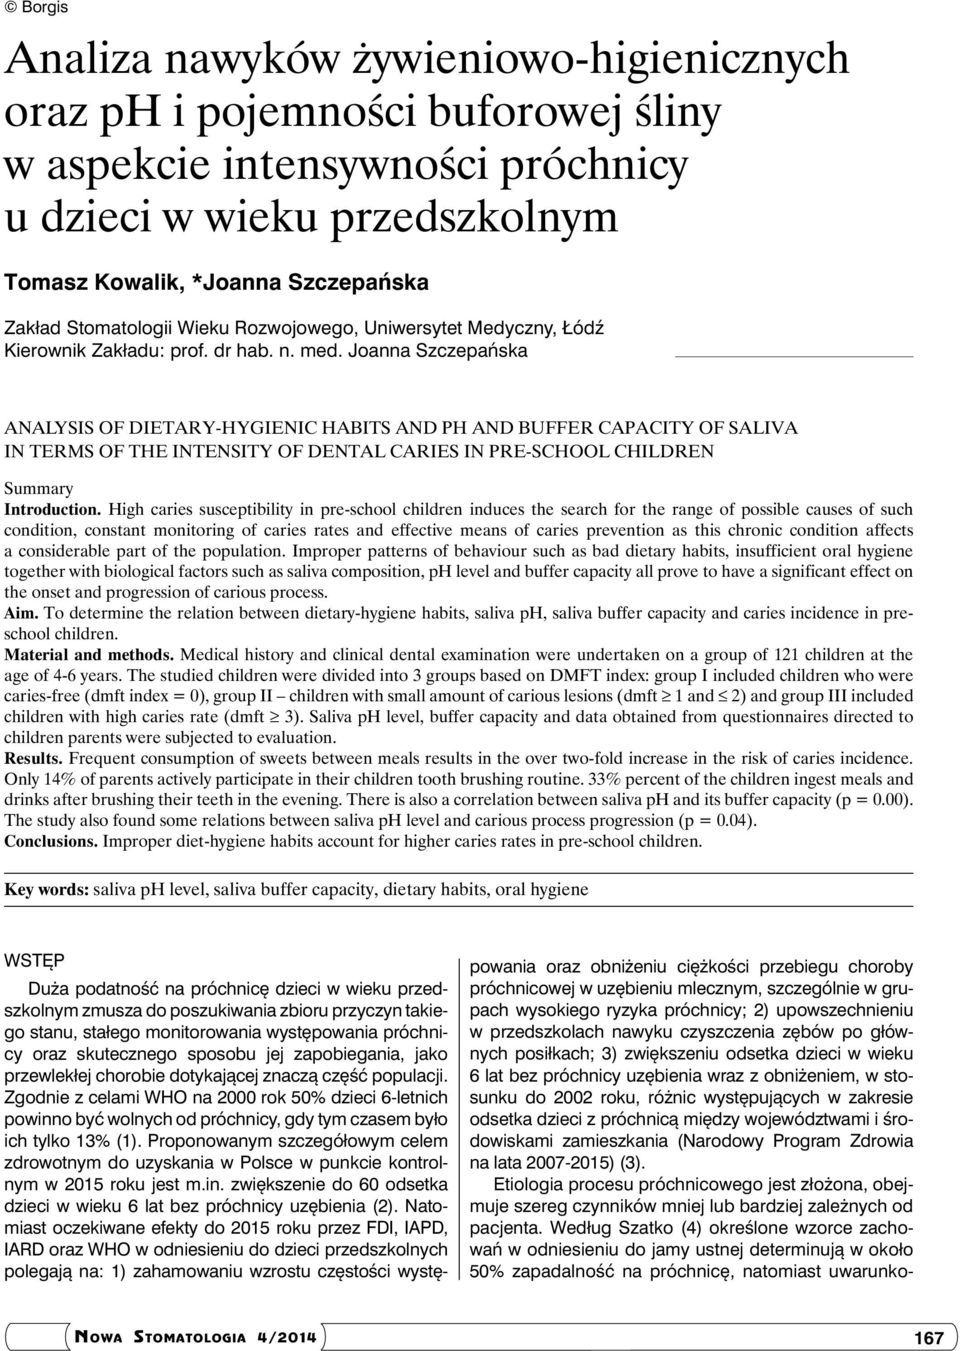 Joanna Szczepańska Analysis of dietary-hygienic habits and ph and buffer capacity of saliva in terms of the intensity of dental caries in pre-school children Summary Introduction.